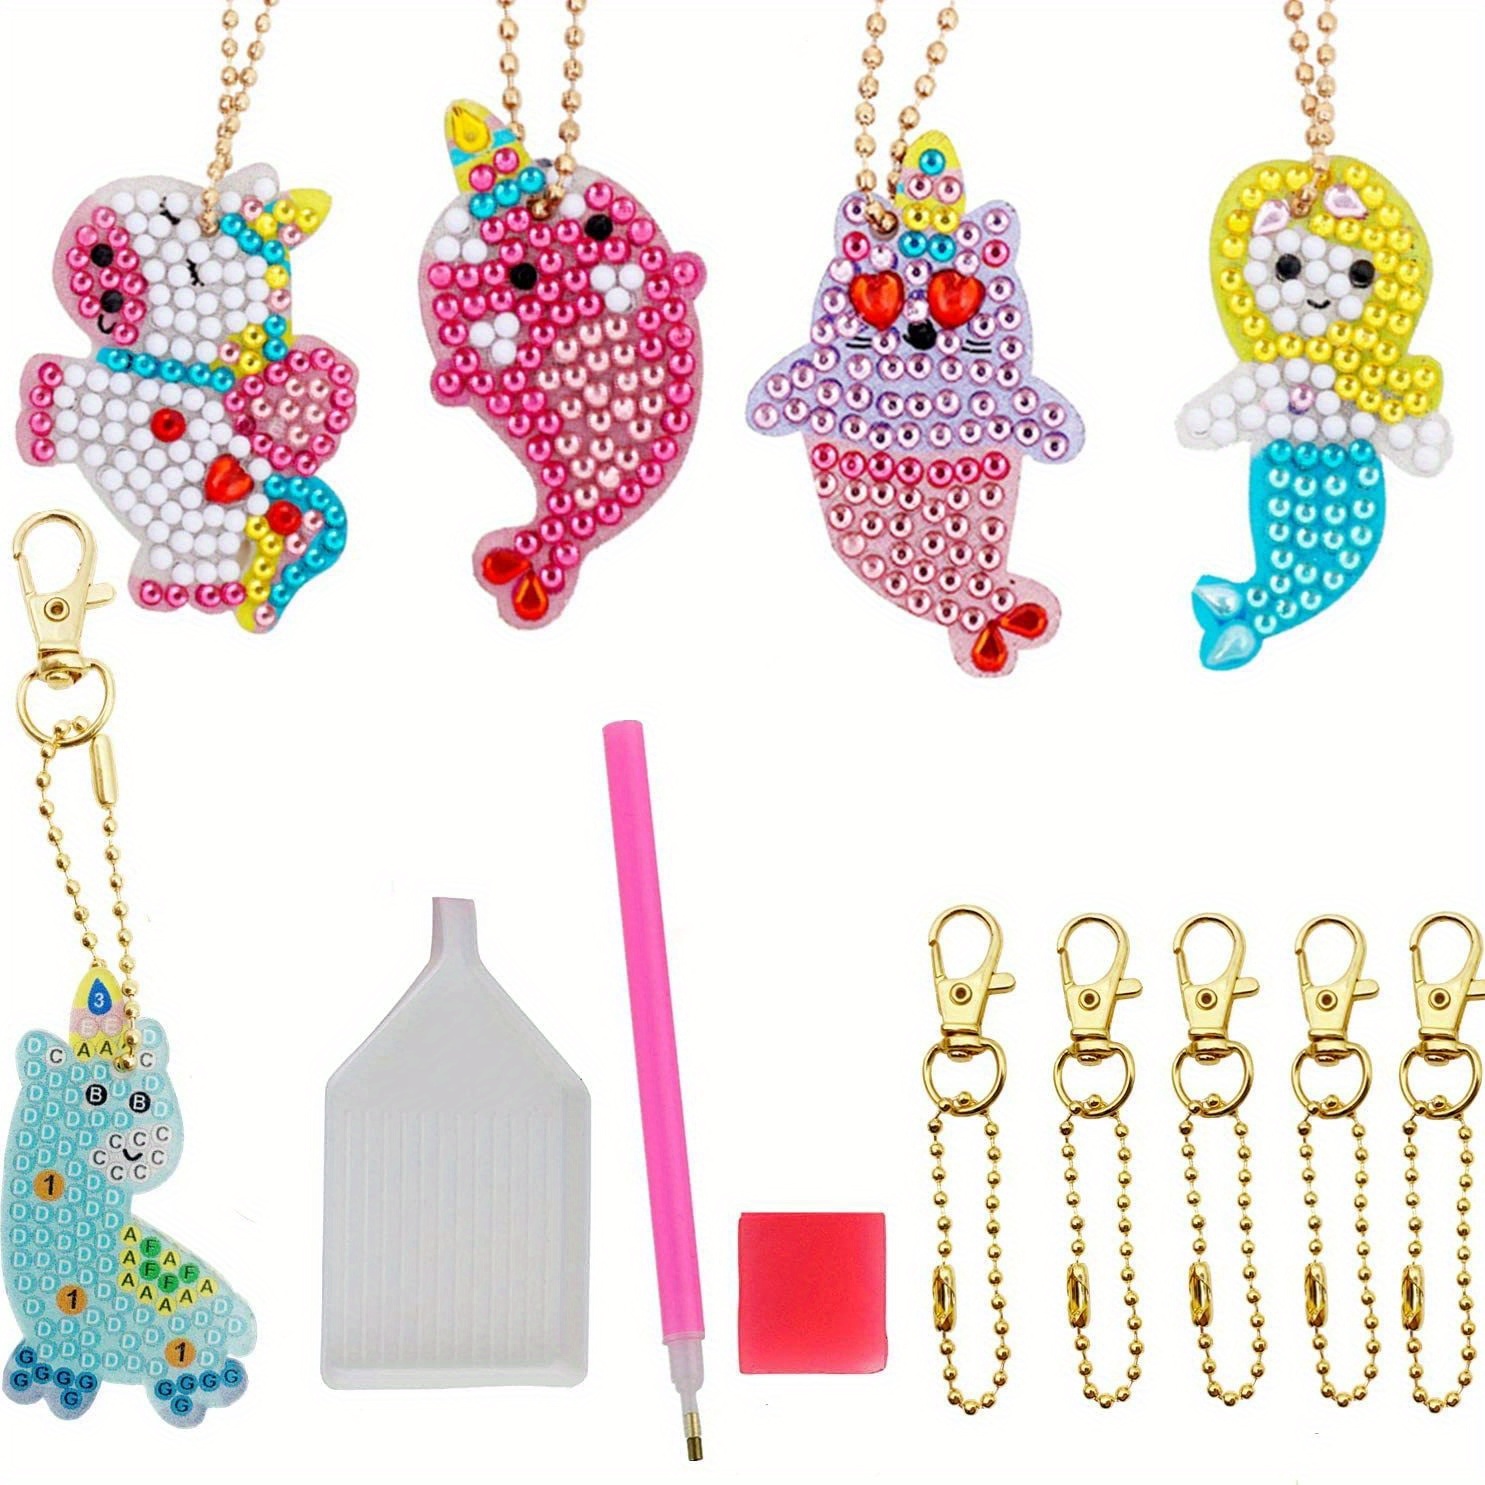 Arts and Crafts for Kids Ages 8-12 - Make Your Own GEM Keychains